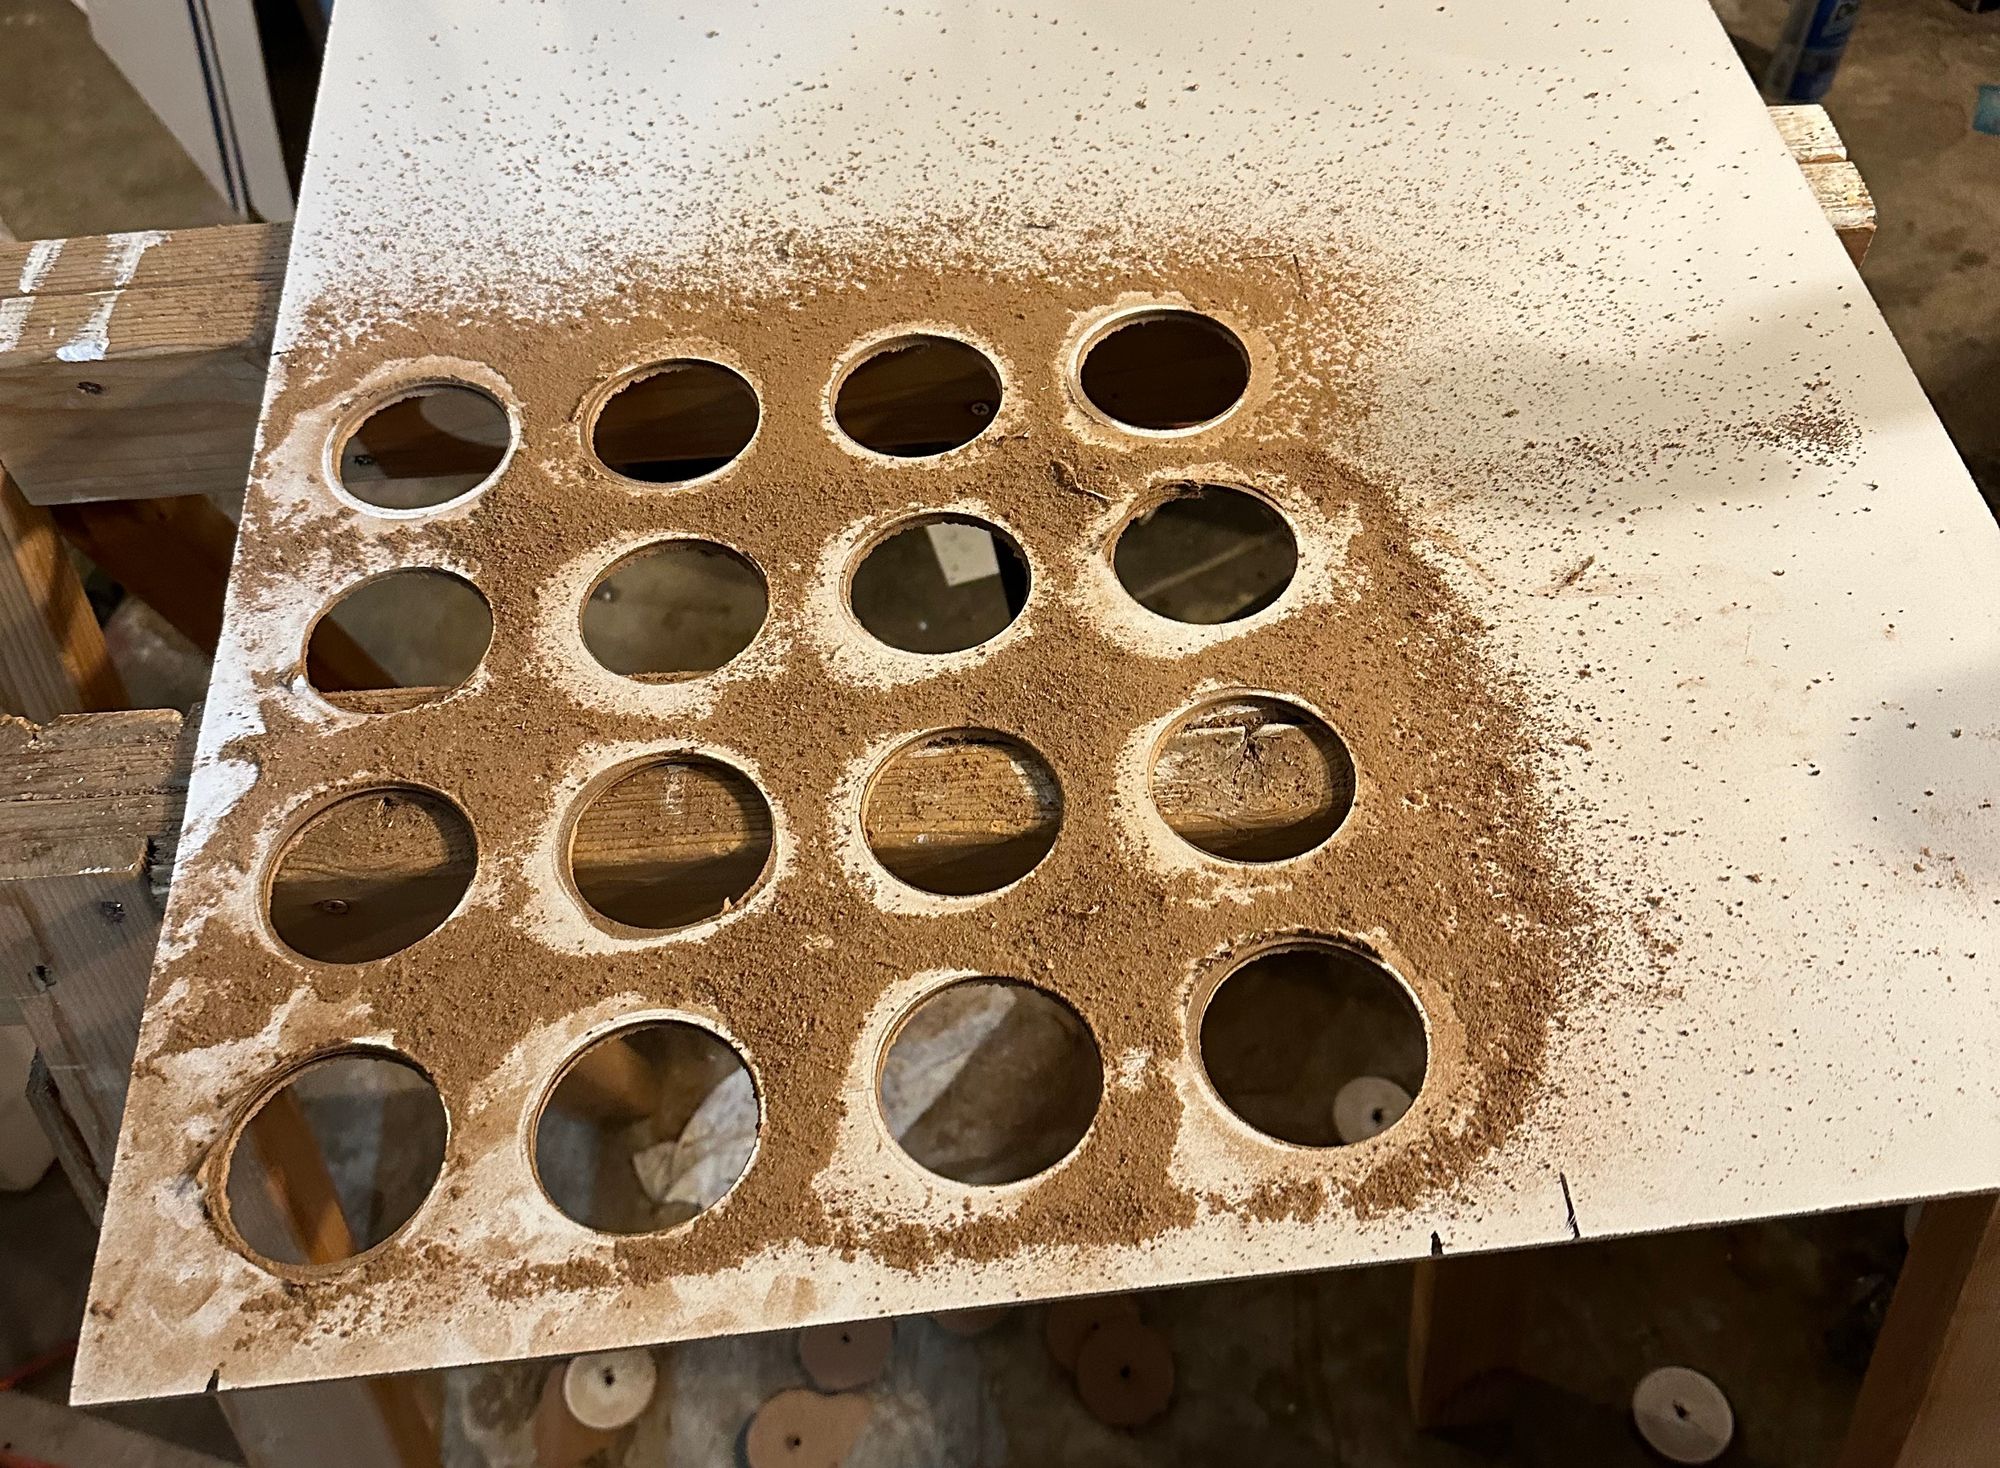 Paint booth (part 2): Venting